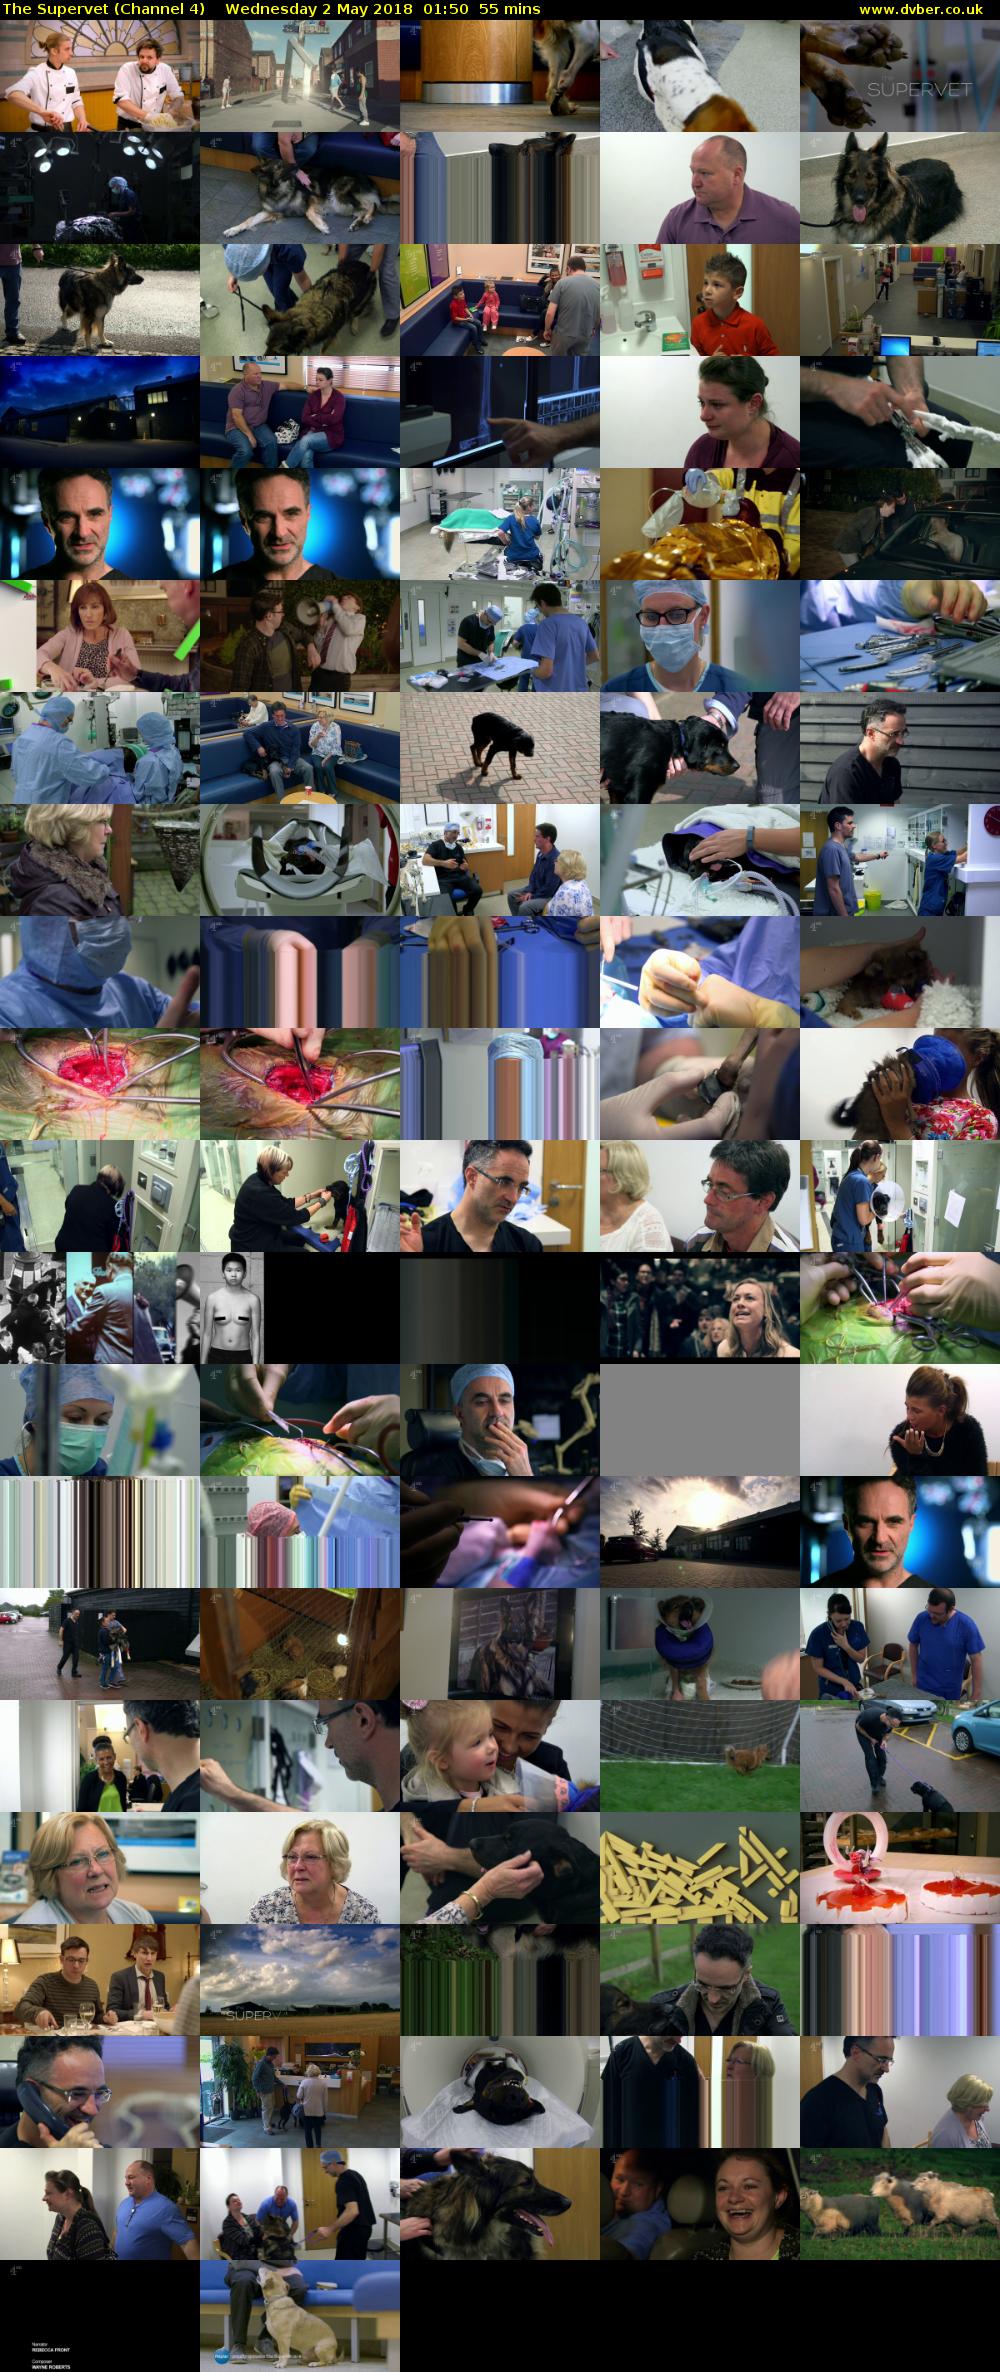 The Supervet (Channel 4) Wednesday 2 May 2018 01:50 - 02:45